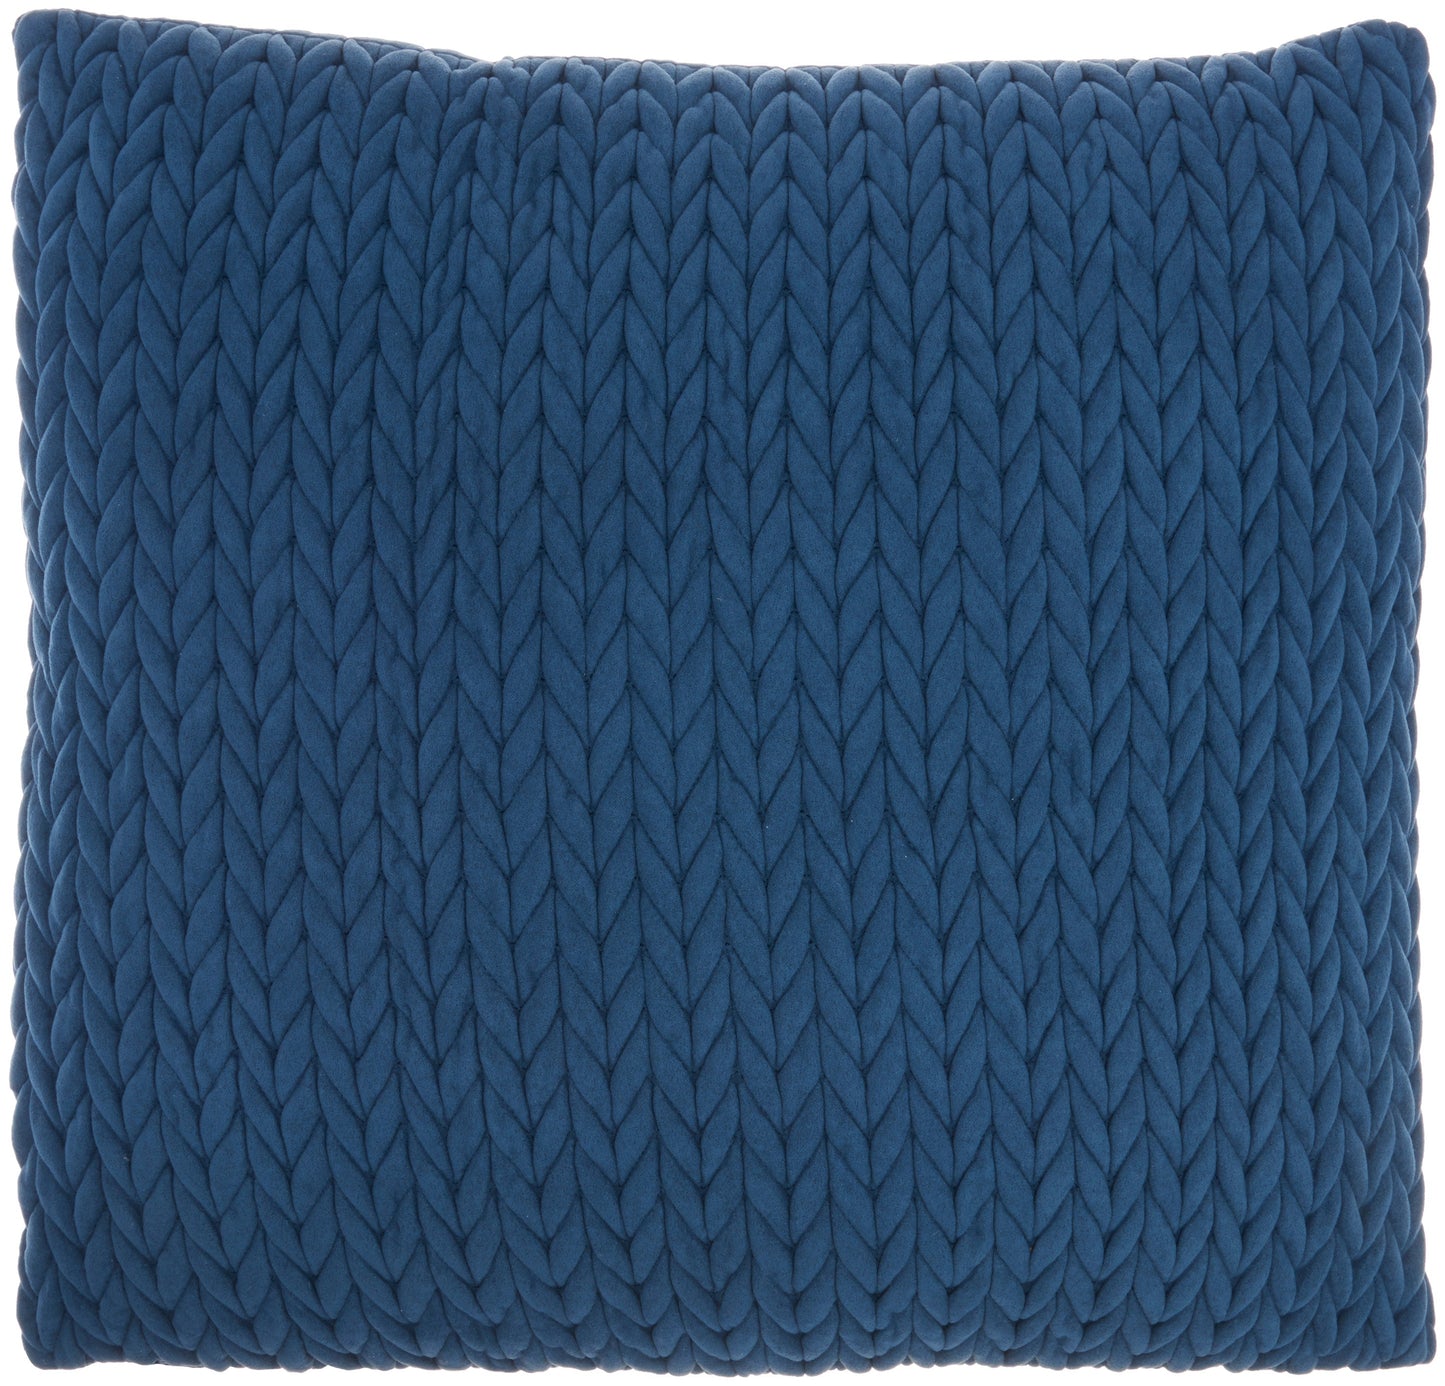 Life Styles ET299 Synthetic Blend Quilted Chevron Throw Pillow From Mina Victory By Nourison Rugs